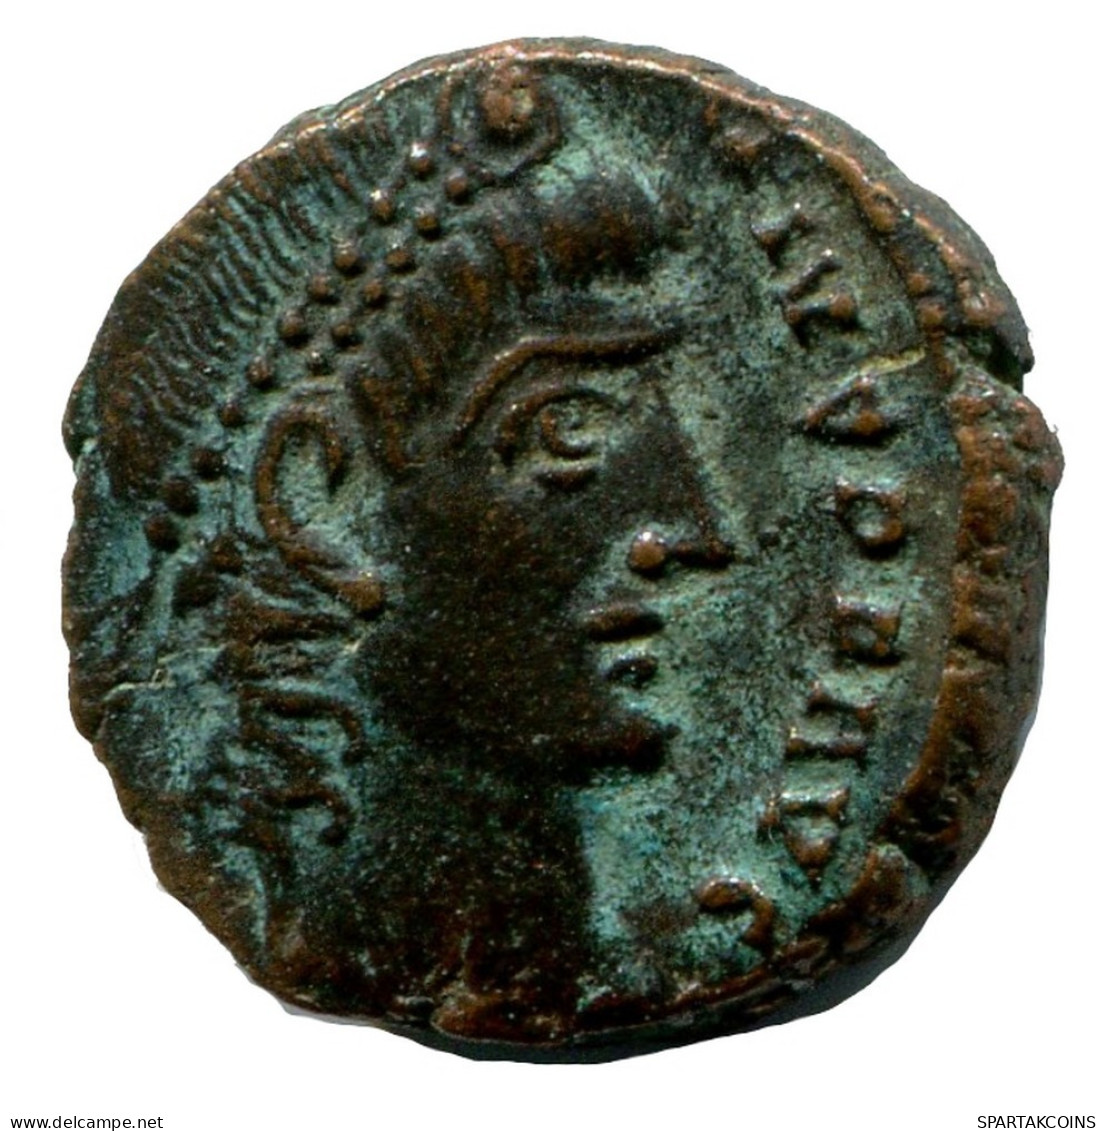 CONSTANTIUS II ALEKSANDRIA FROM THE ROYAL ONTARIO MUSEUM #ANC10196.14.F.A - The Christian Empire (307 AD Tot 363 AD)